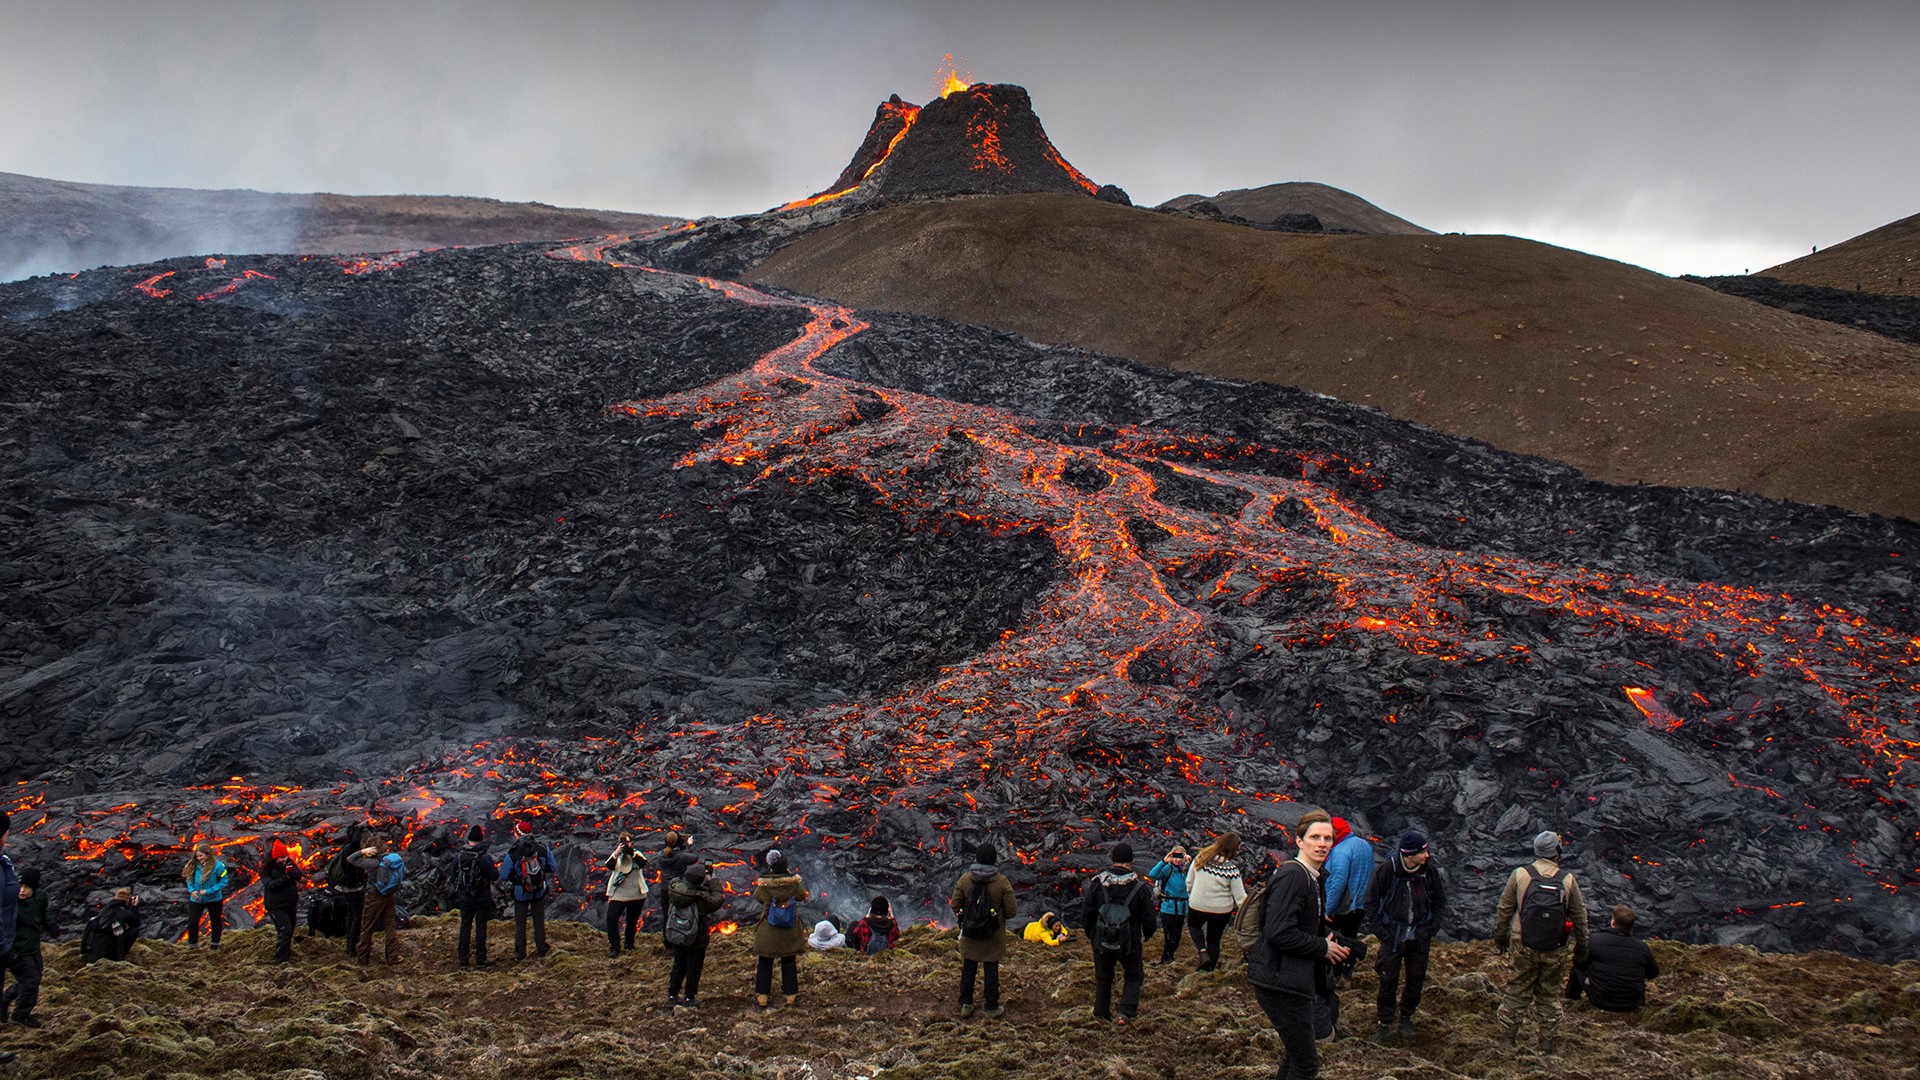 Iceland's latest volcano eruption is quickly attracting crowds of people hoping to get close to the gentle lava flows.